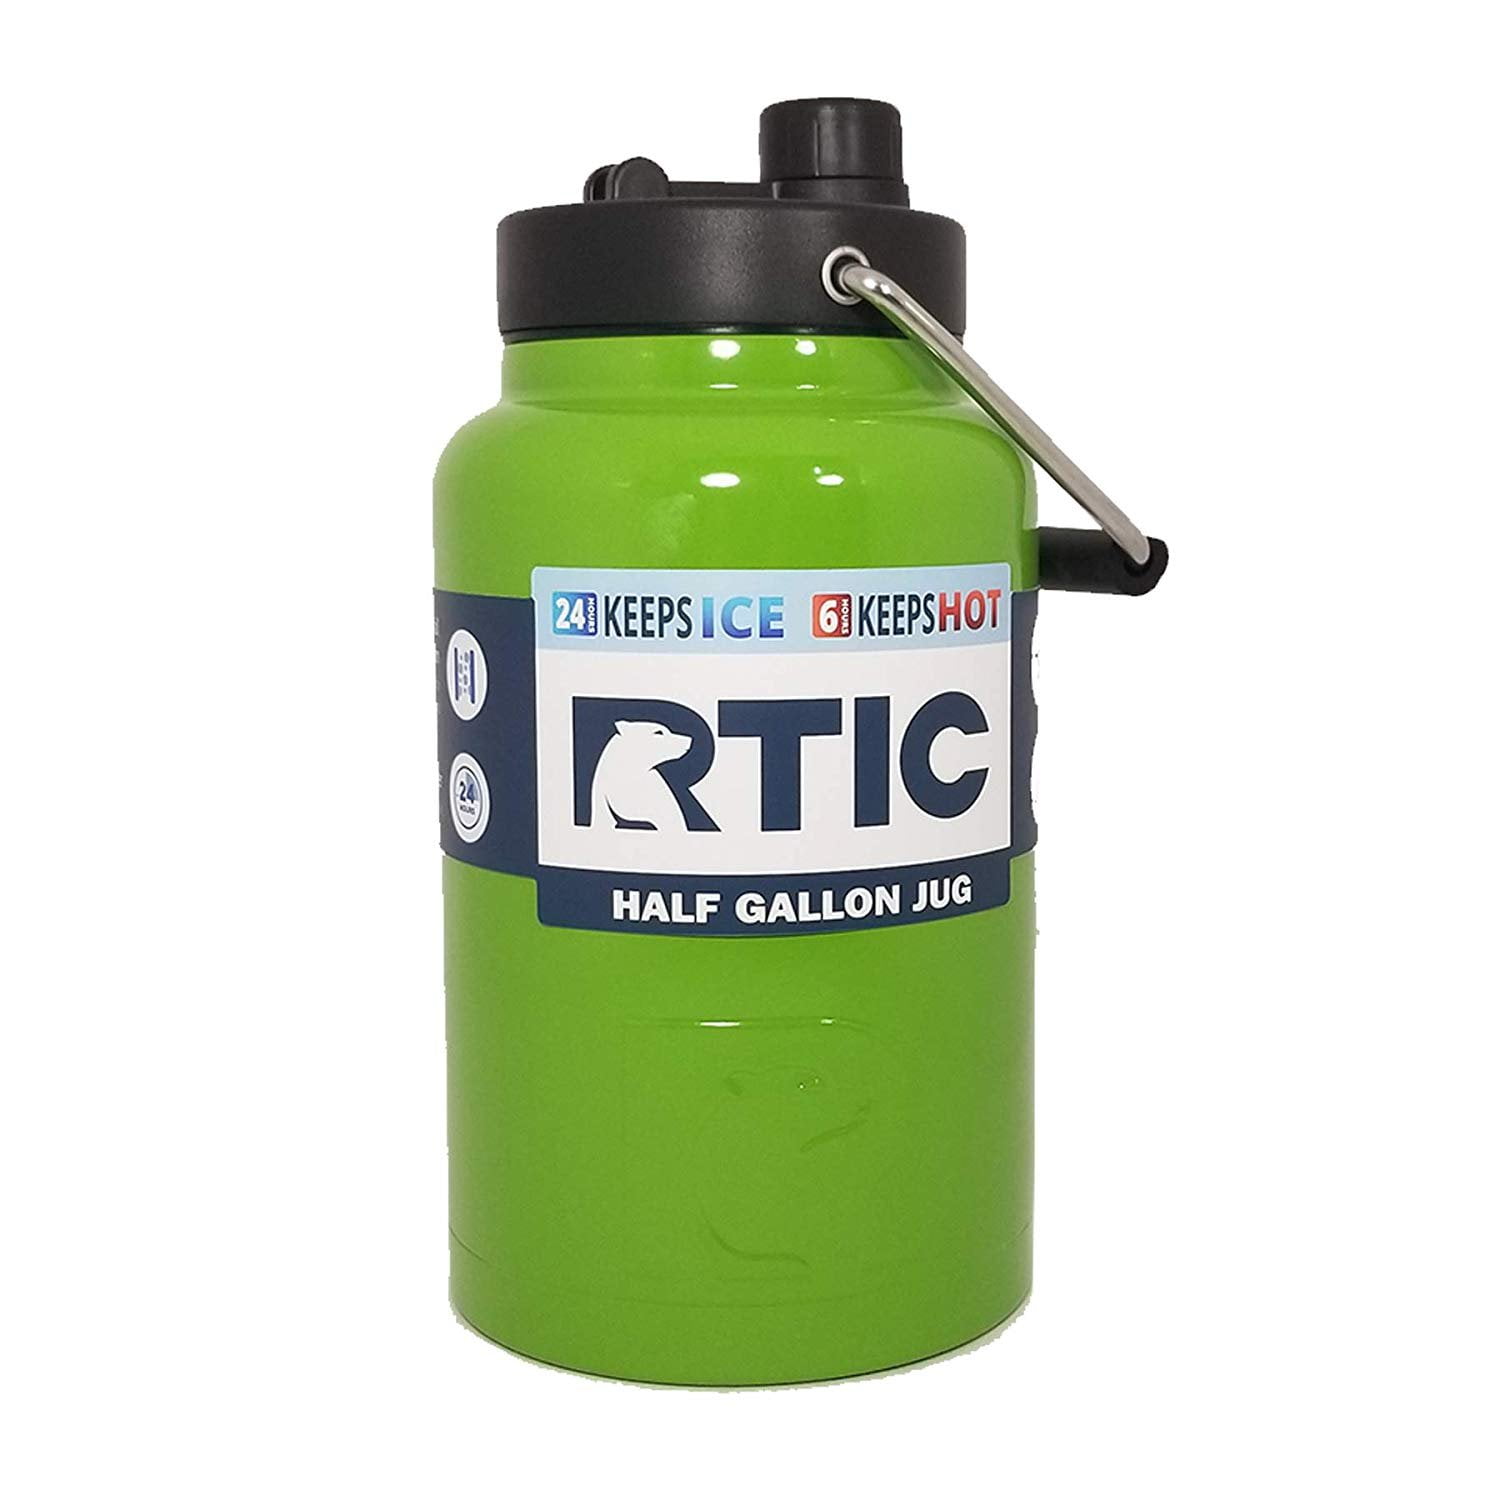 RTIC Half Gallon Jug Personalized and Engraved, Fast Free Shipping 